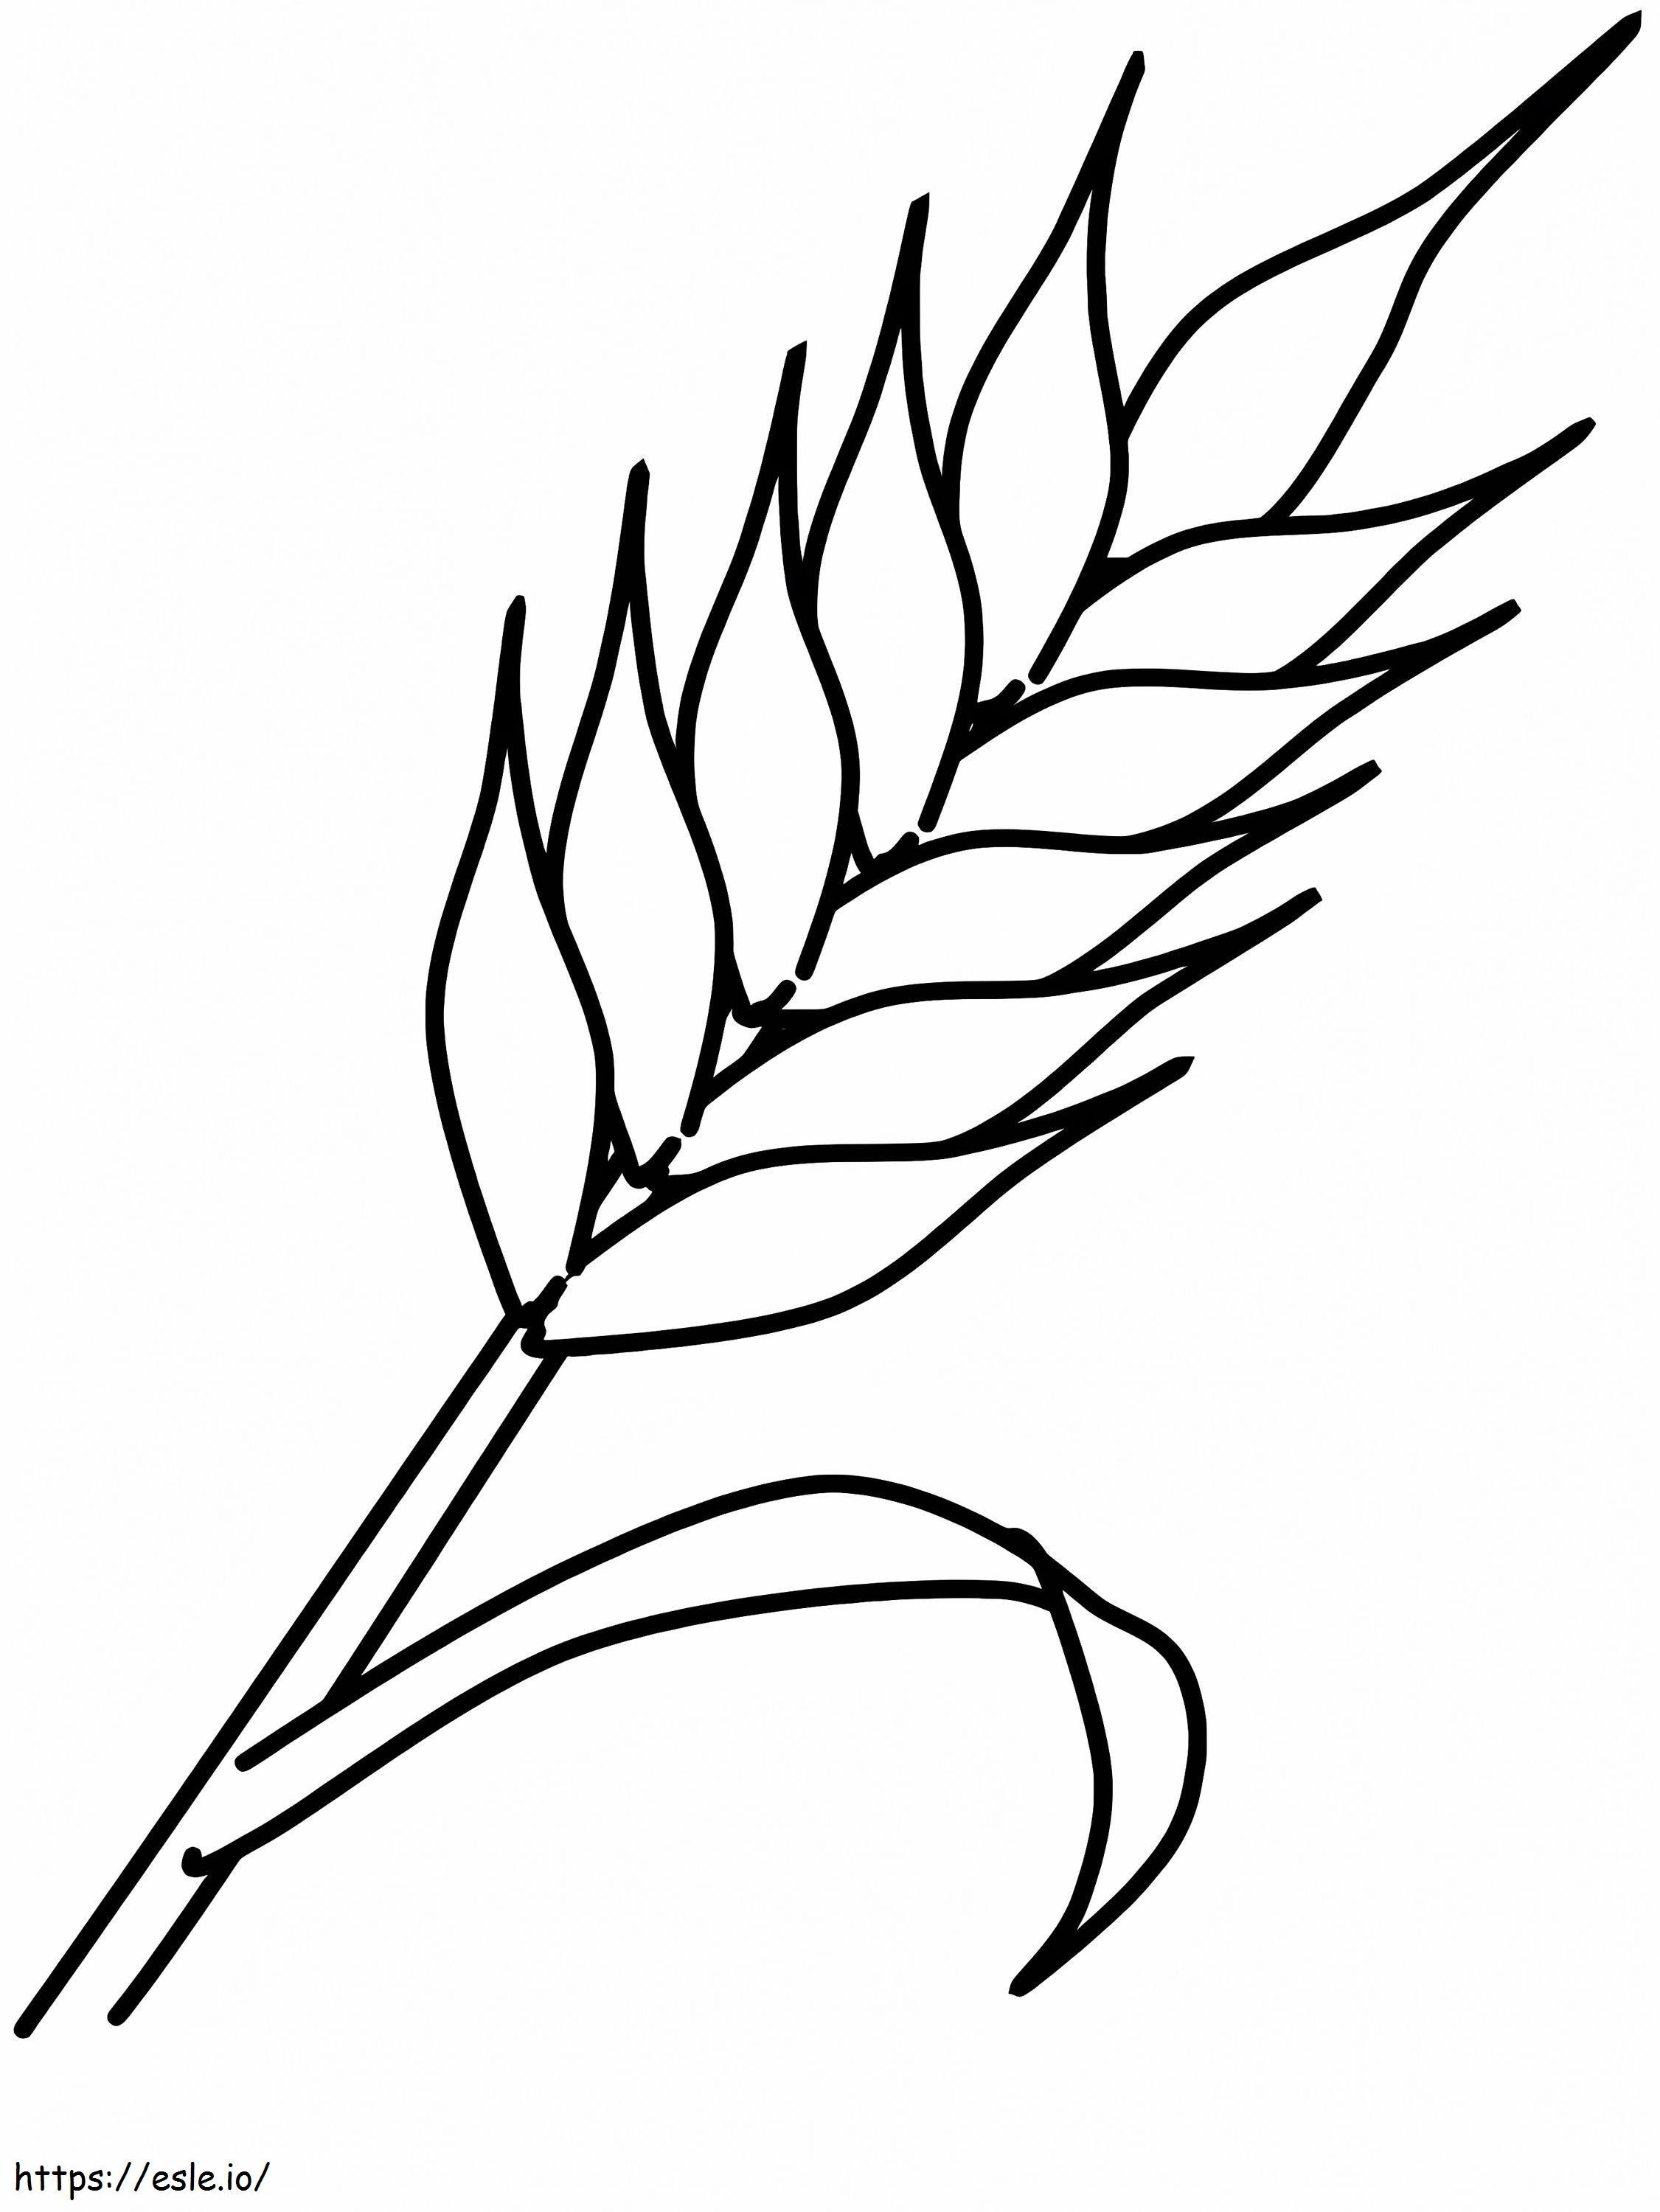 Plain Wheat coloring page